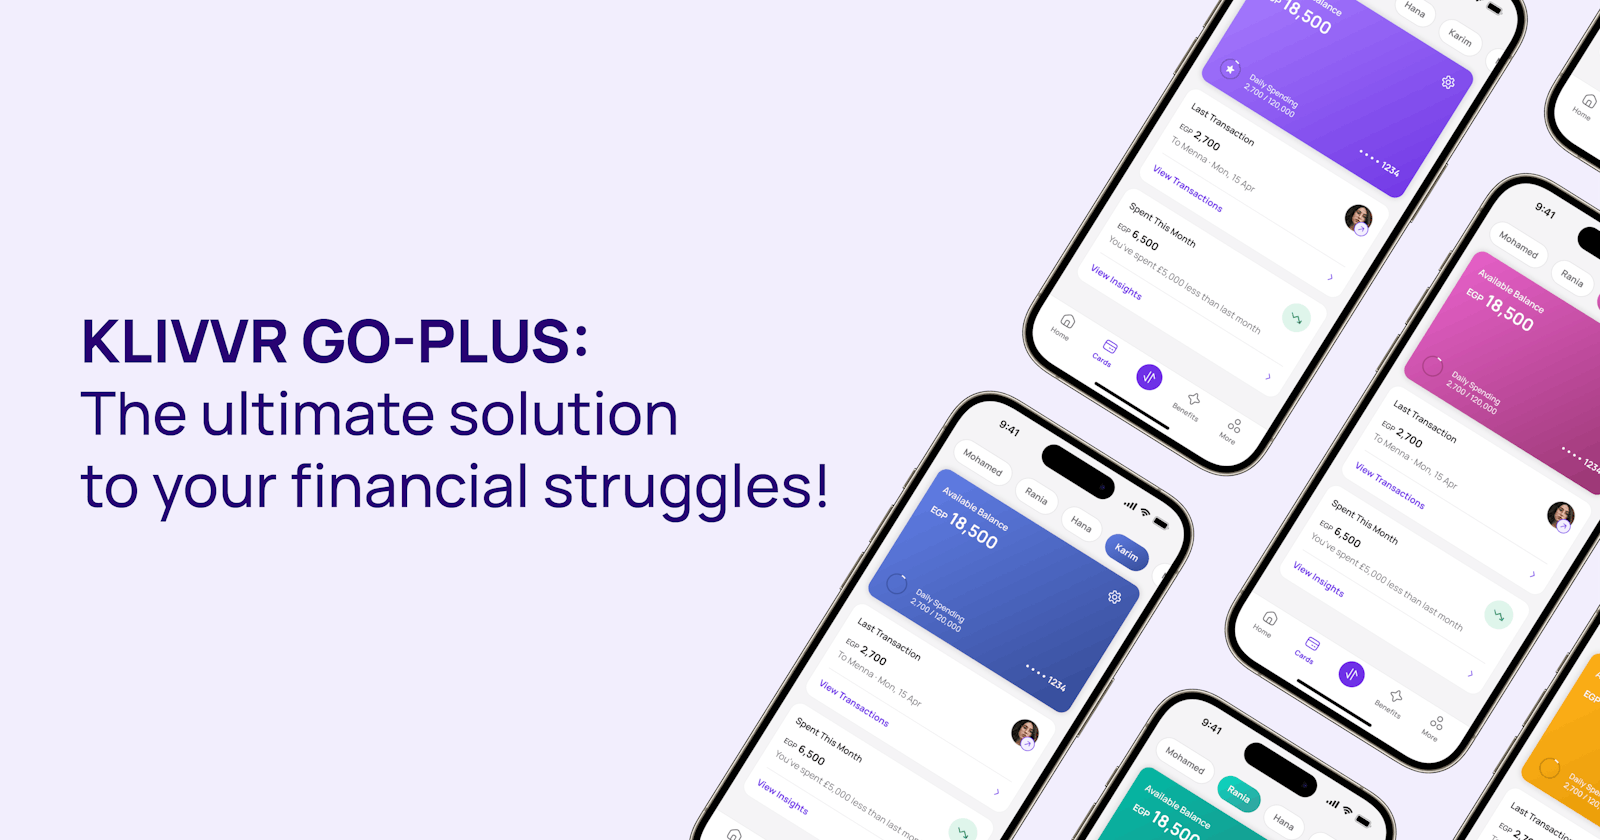 Klivvr Go-Plus: The ultimate solution to your financial struggles!